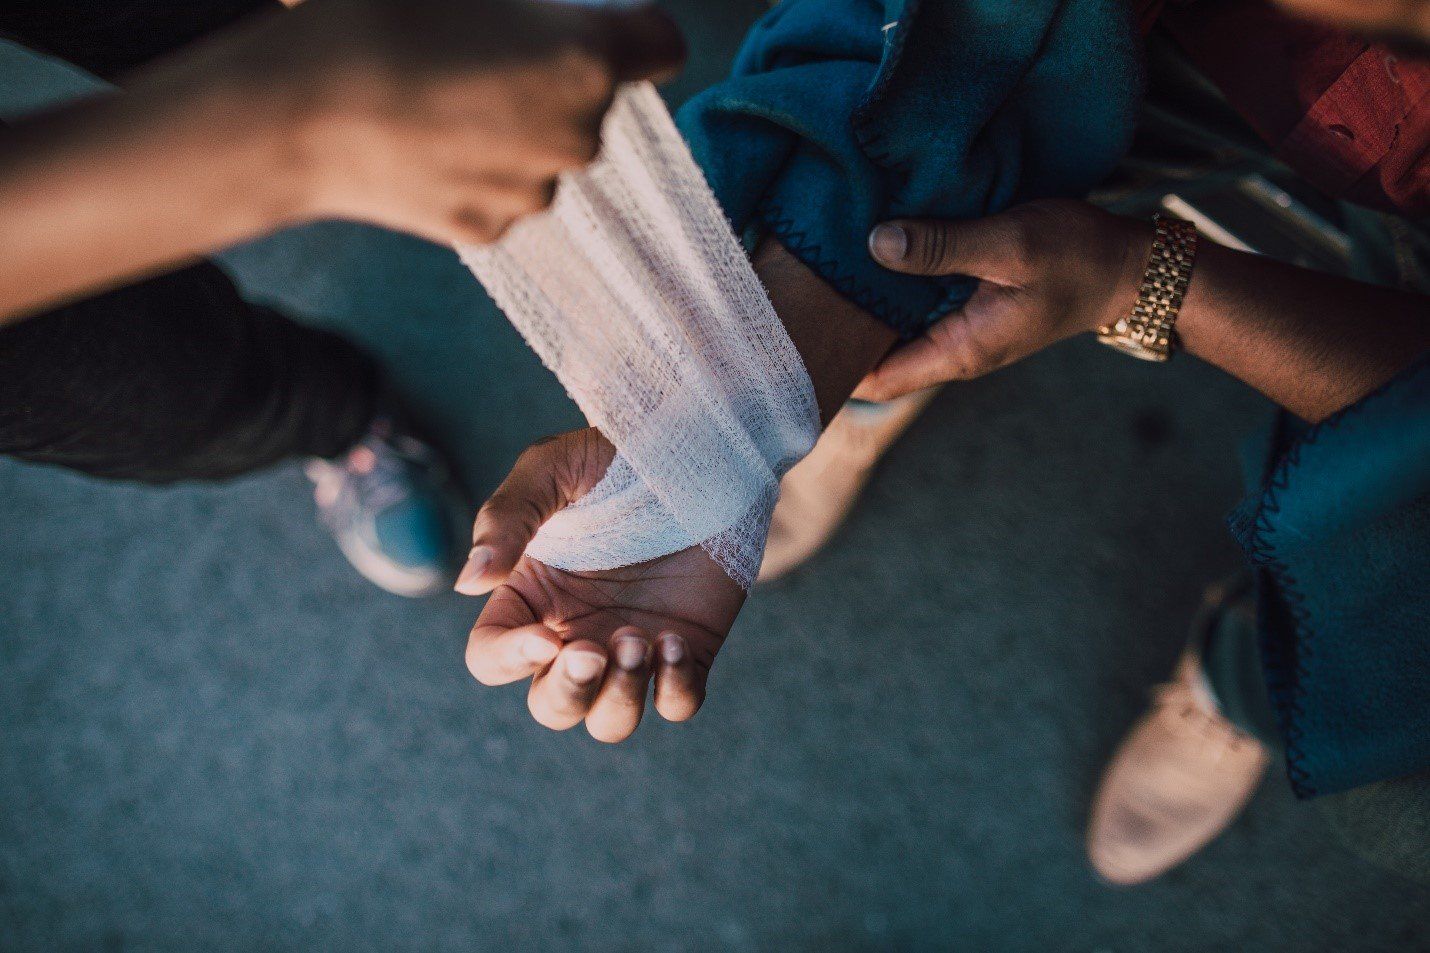 A person tying a bandage on another person’s hand